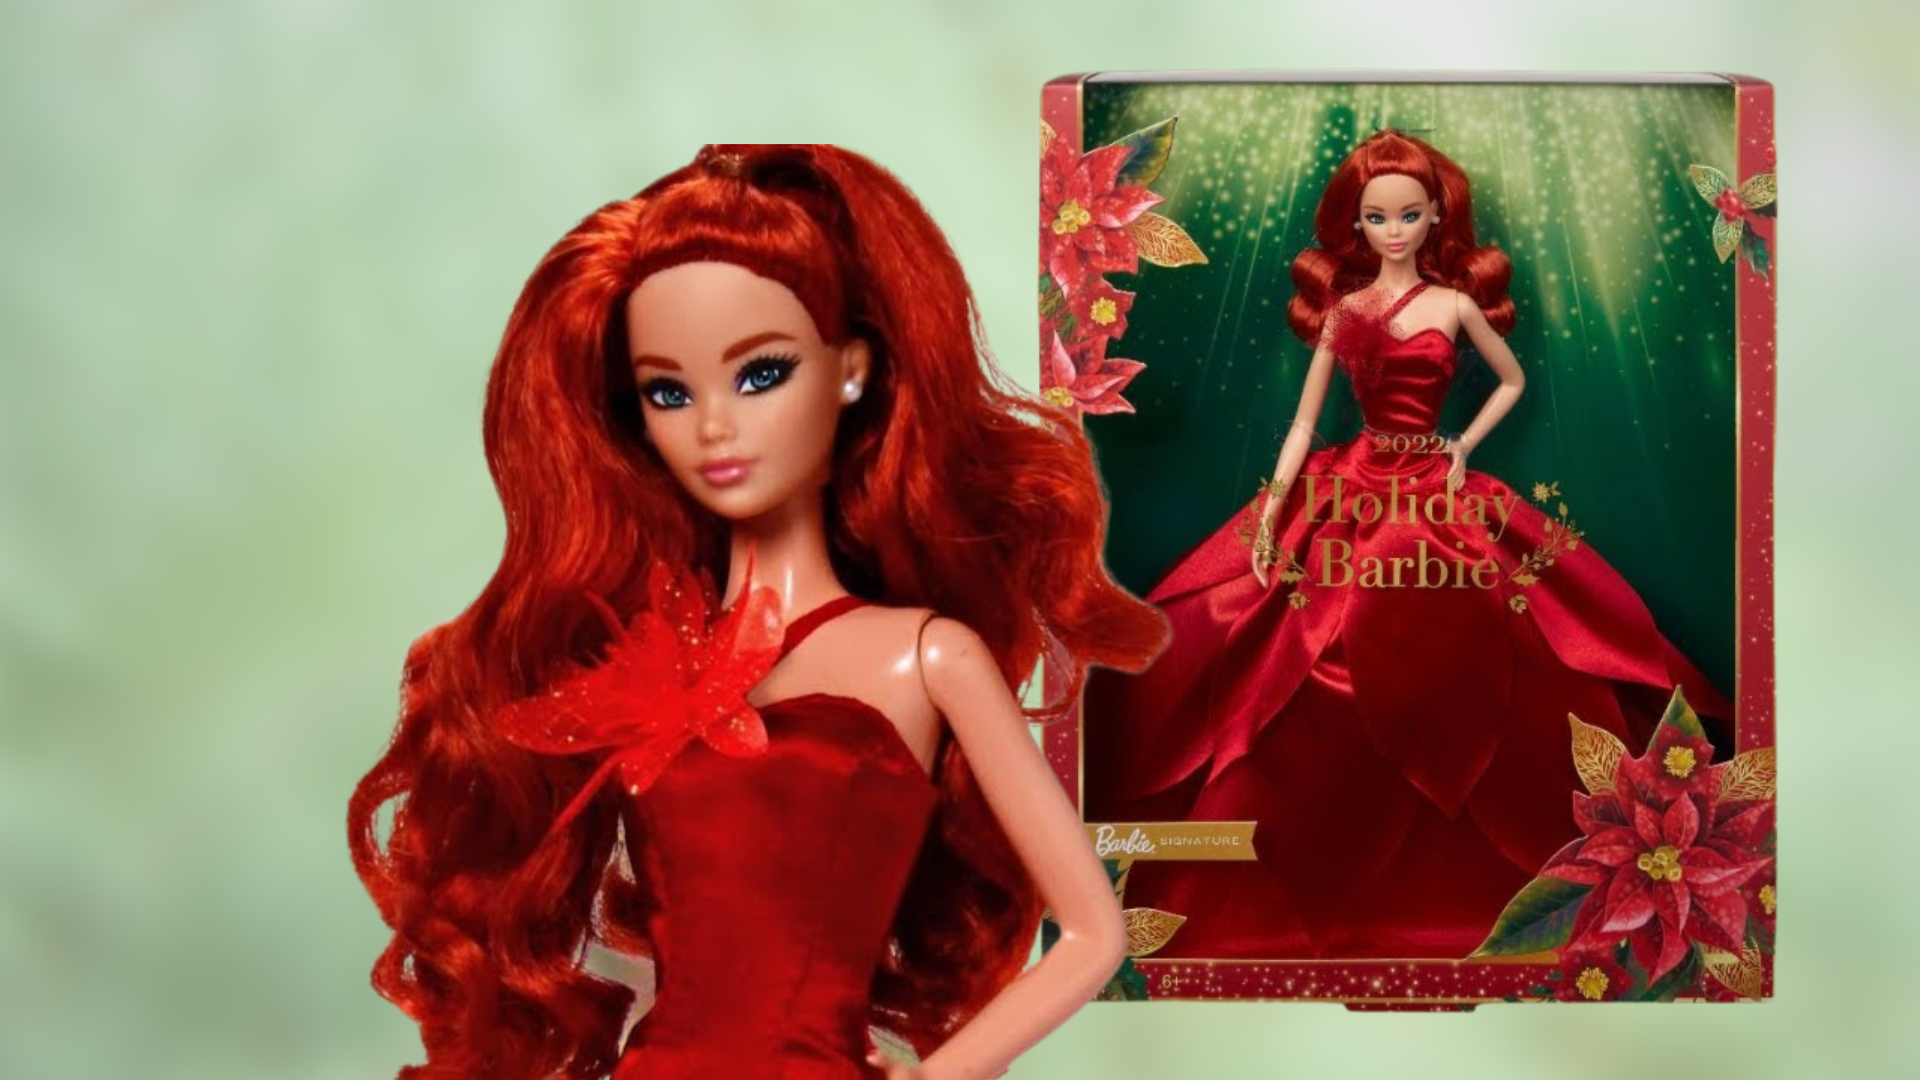 Limited Release Redhead Barbie Is Released For 2022 Holiday Season